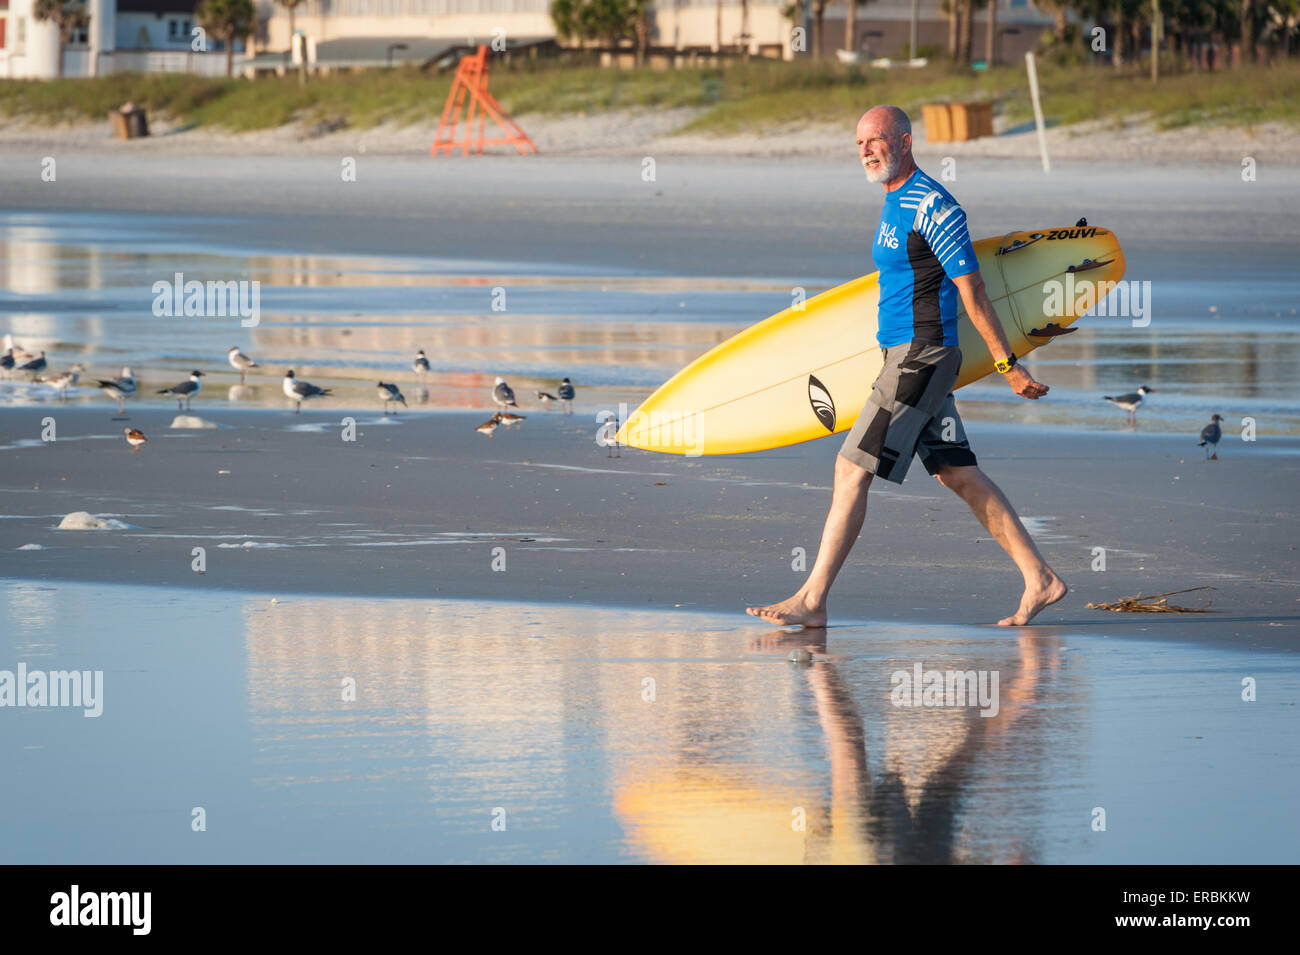 Senior surfer heads out for an early morning surf session at Jacksonville Beach, Florida. USA. Stock Photo